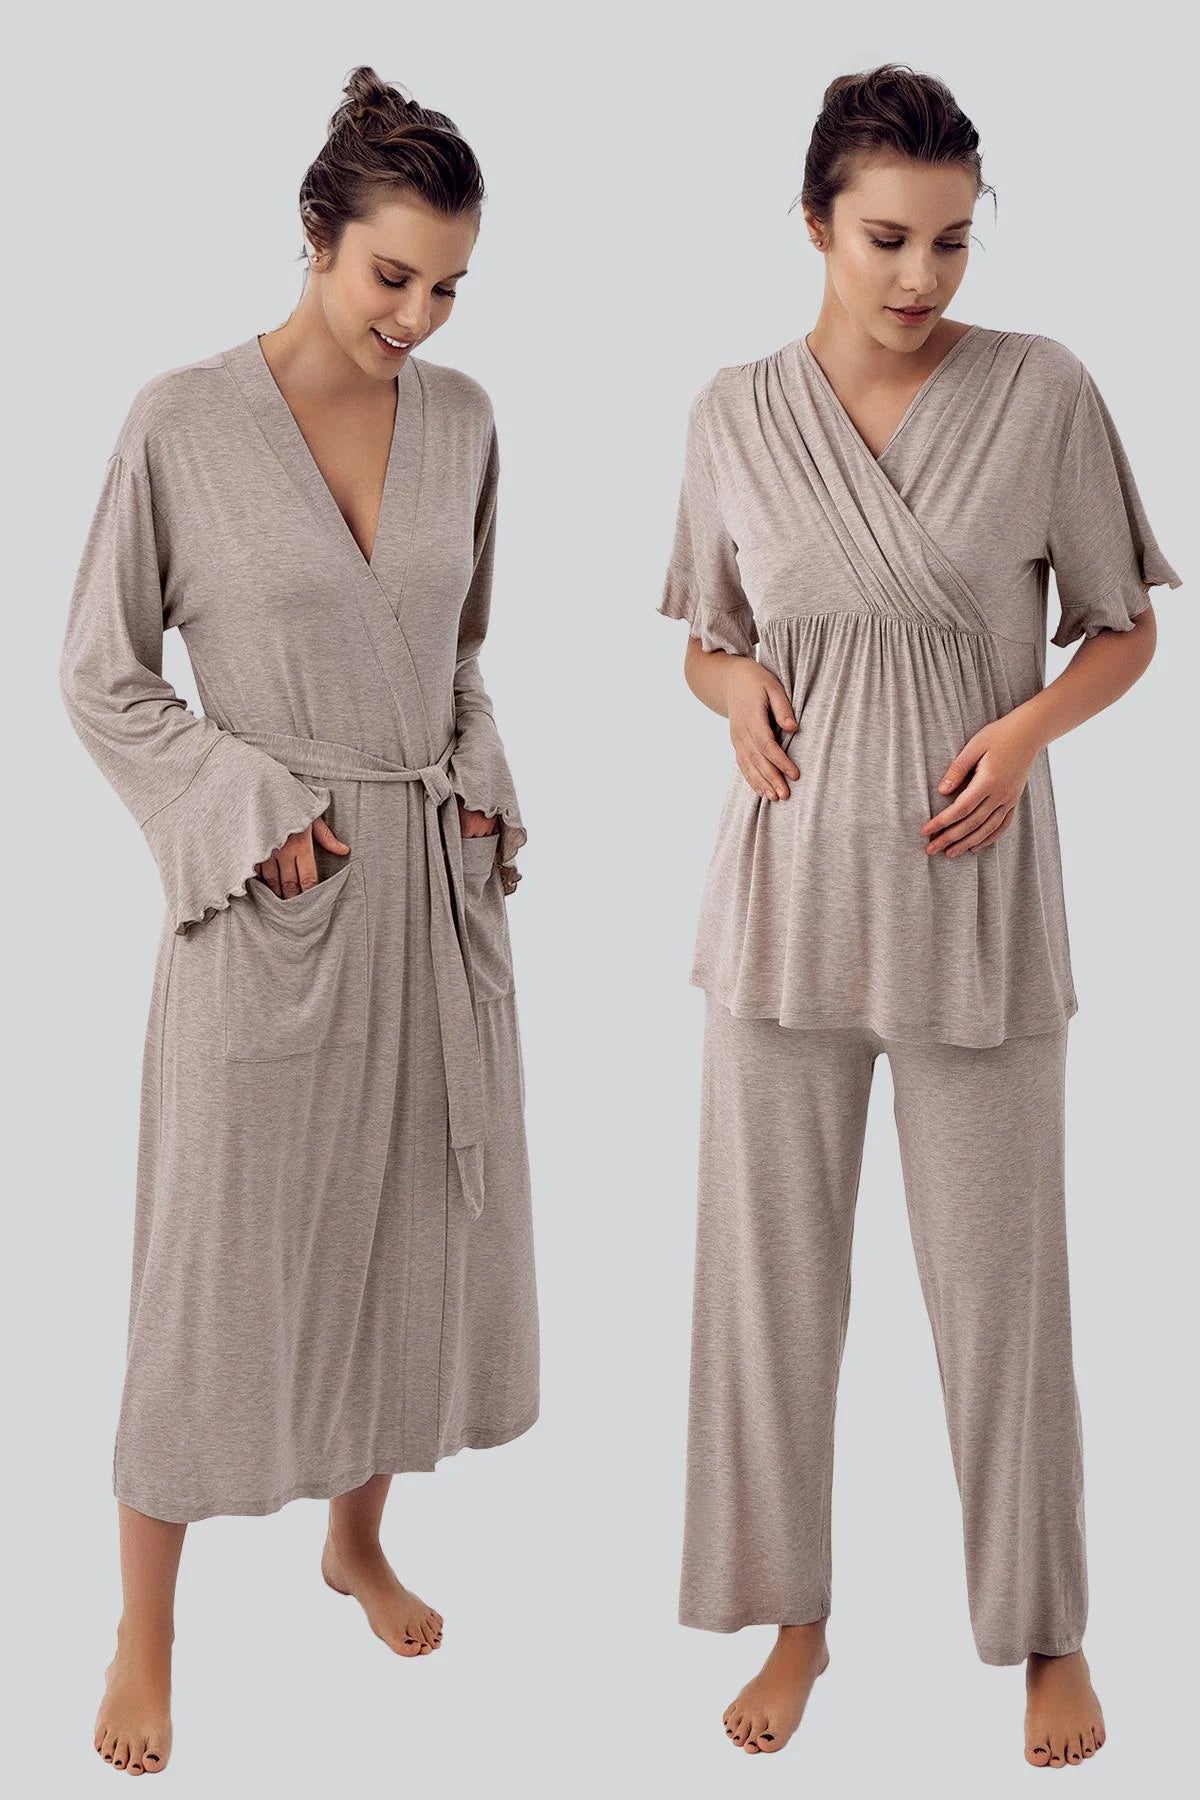 Shopymommy 16309 Double Breasted 3-Pieces Maternity & Nursing Pajamas With Flywheel Arm Robe Beige